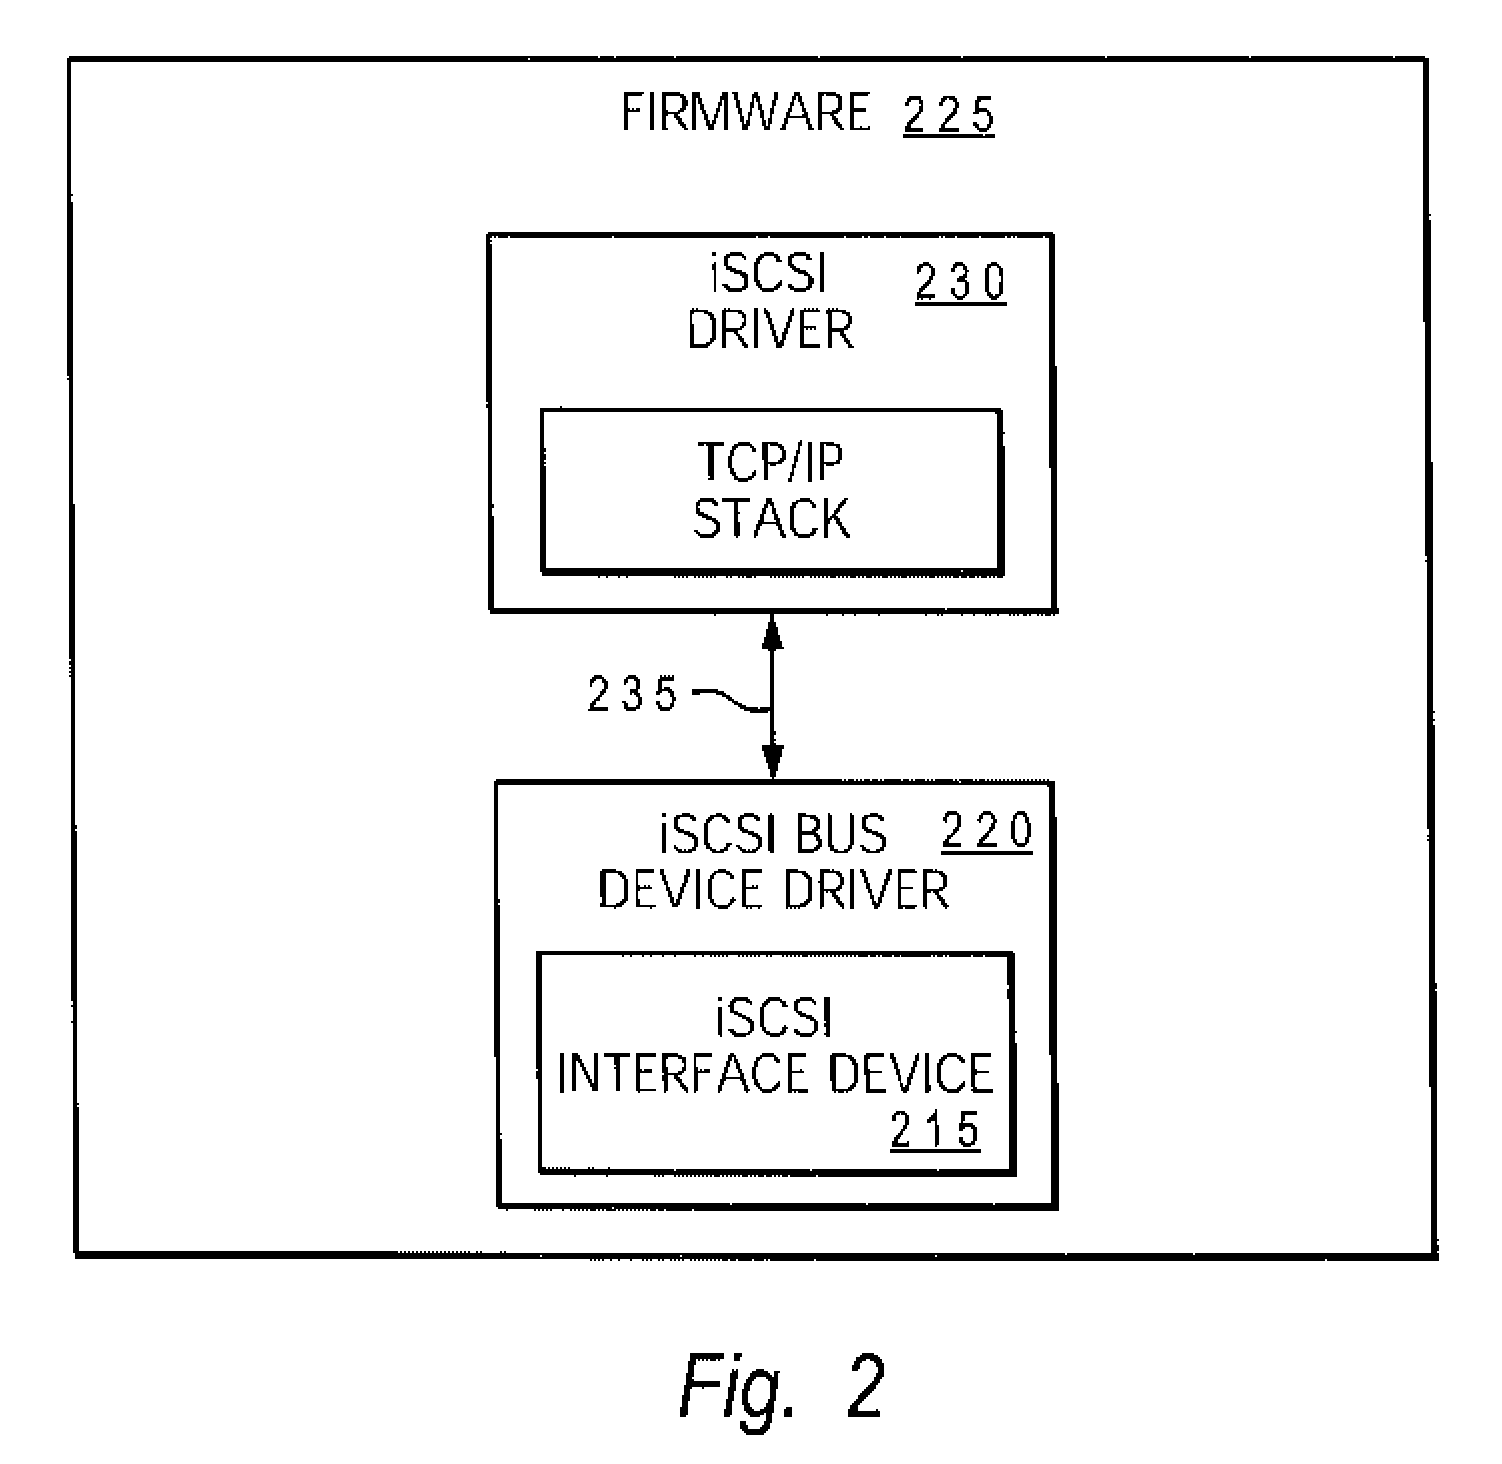 Method to Enable Firmware to Boot a System from an ISCSI Device